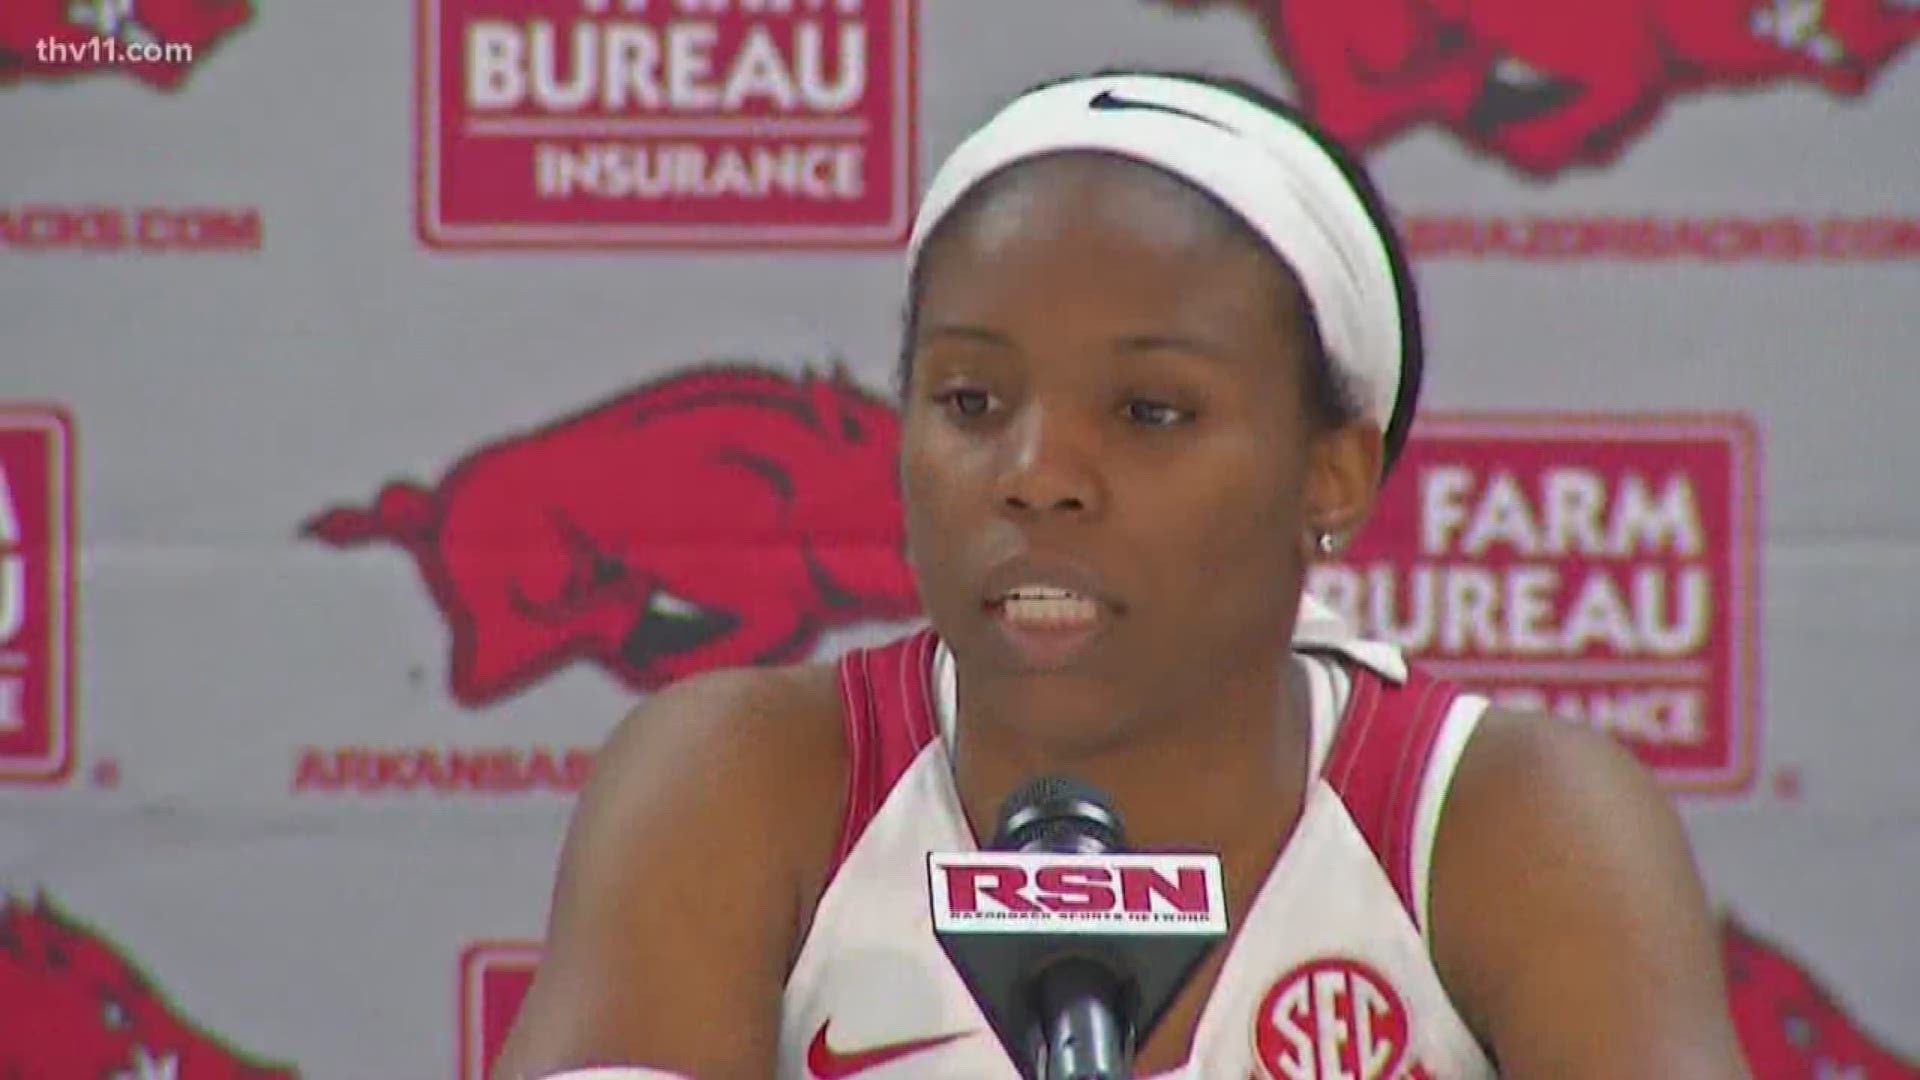 Razorbacks opened on a 17-3 run in the first quarter